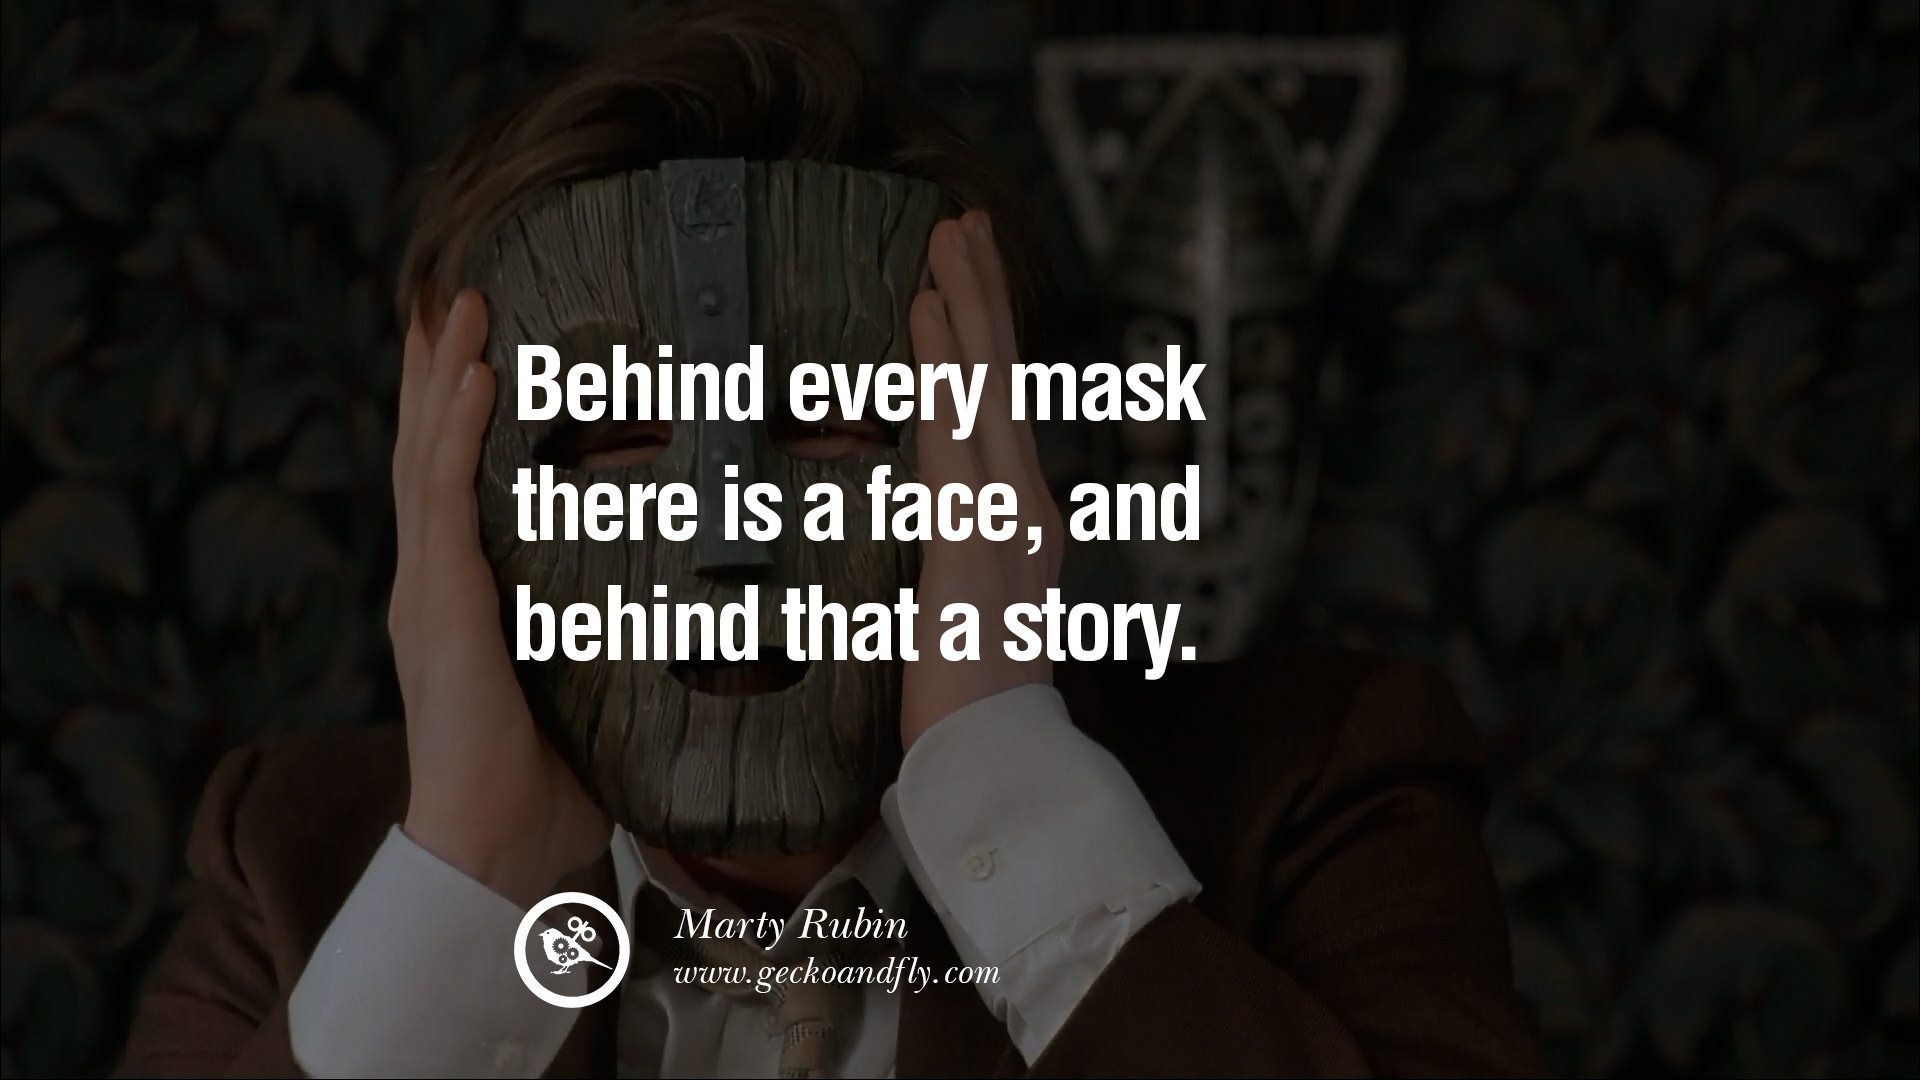 Quotes On Wearing A Mask Lying And Hiding Oneself Face